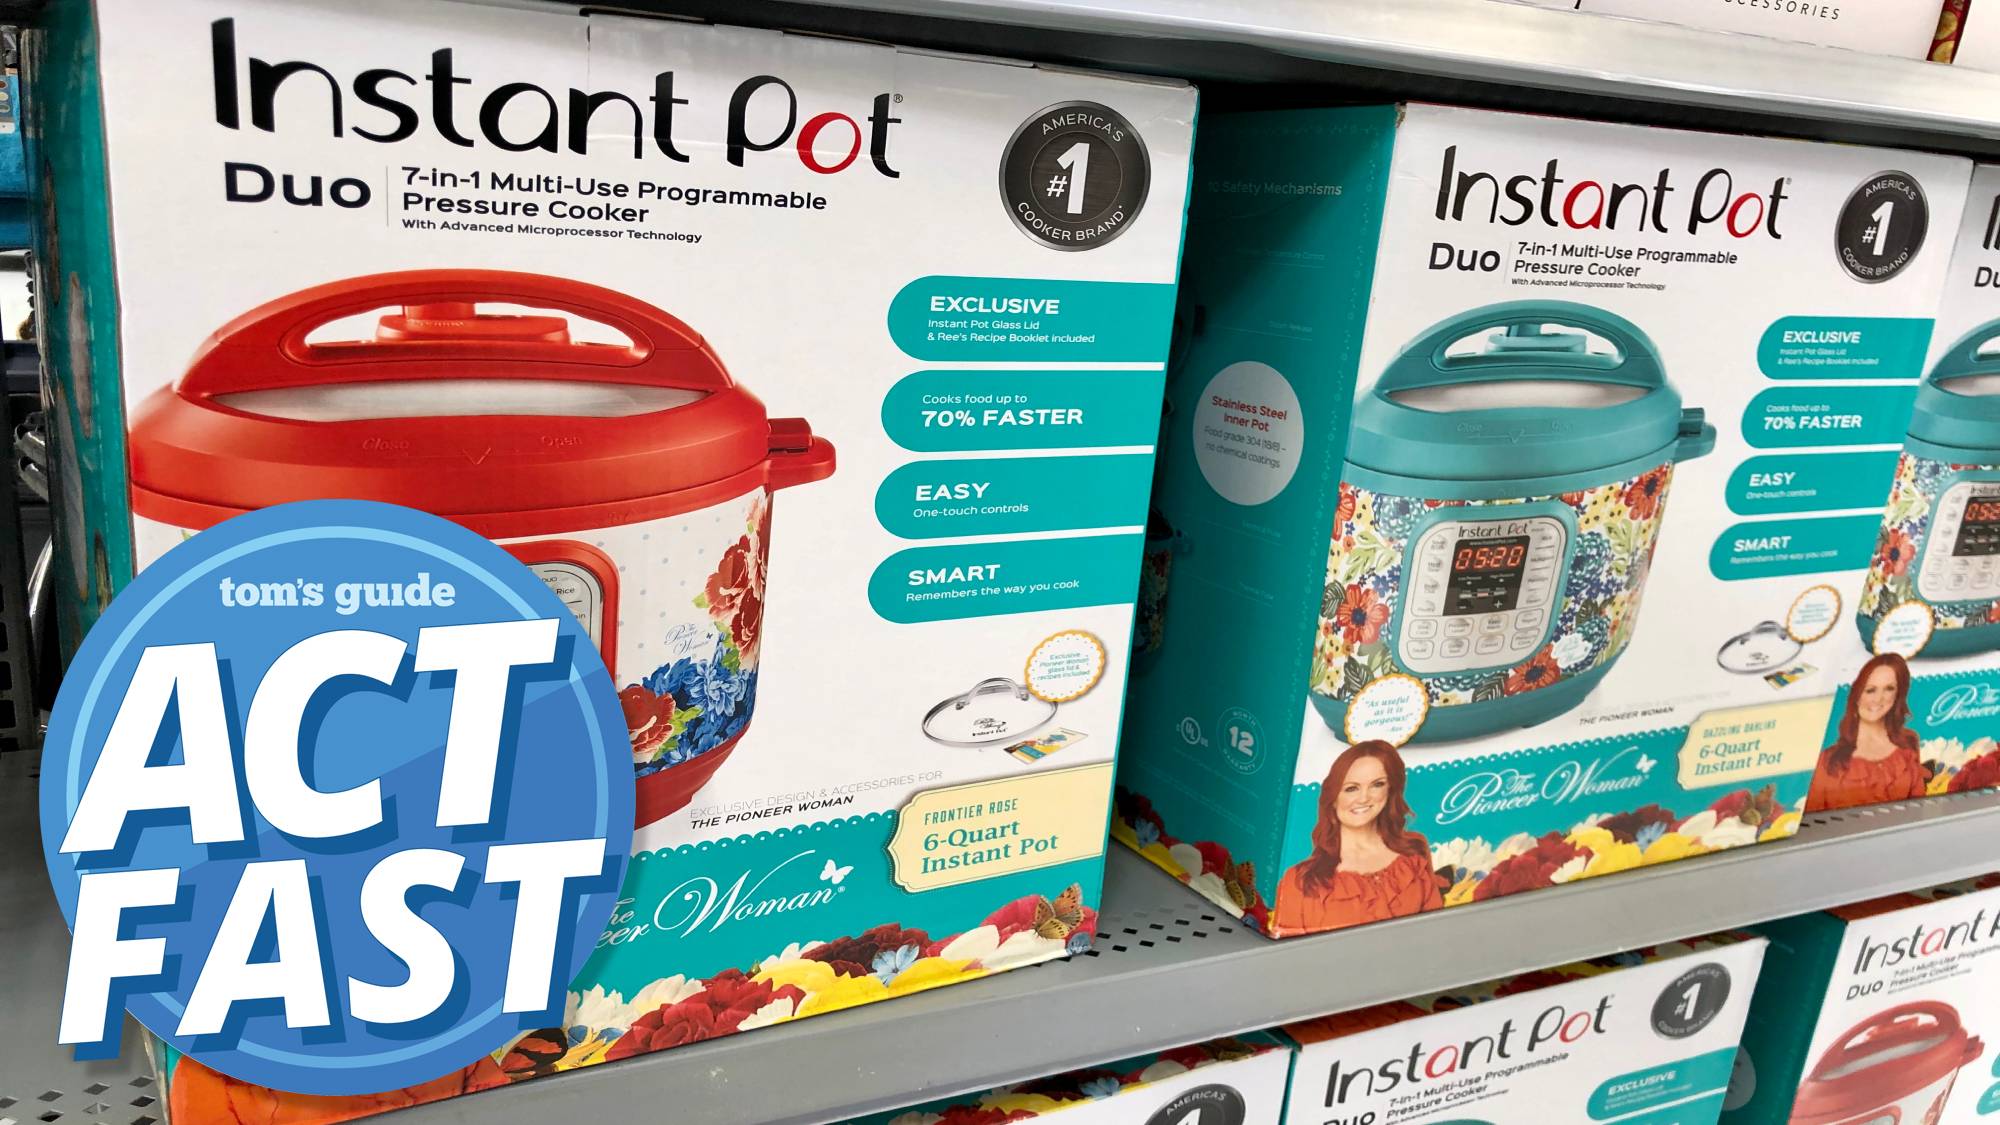 Instant Pot deal: Get a beautiful floral multi-cooker for just $49